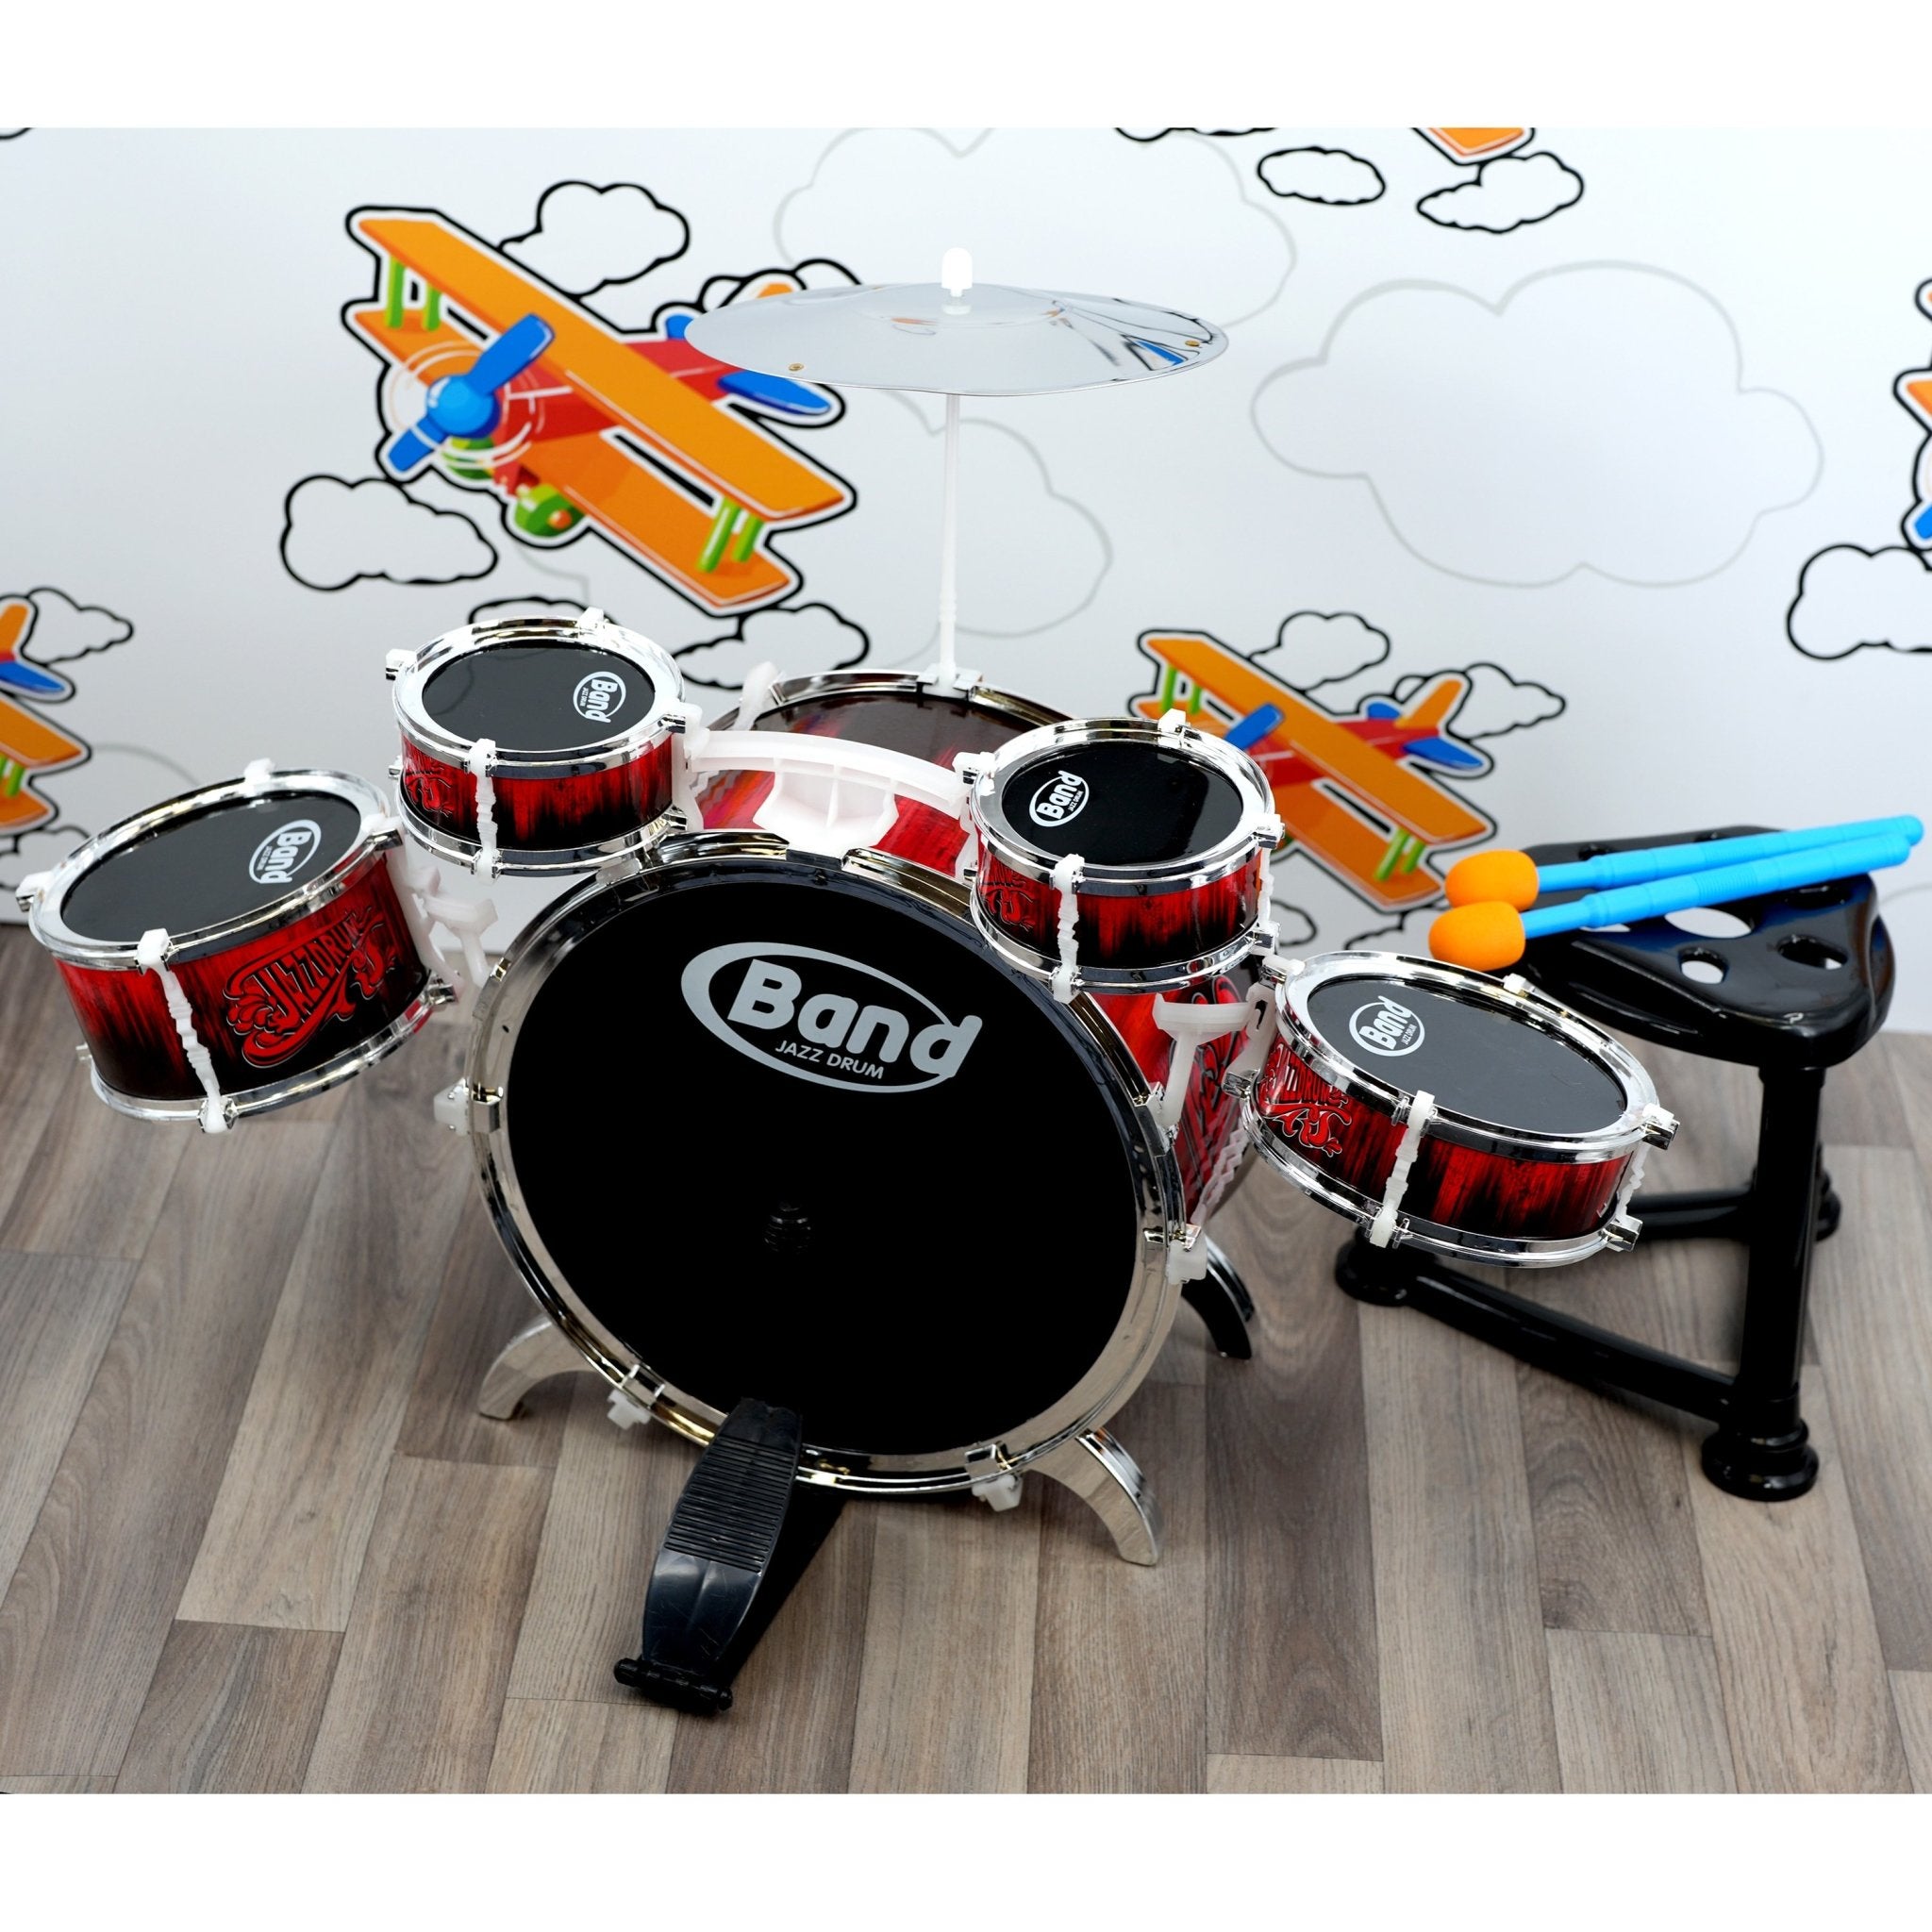 Childs Drum Playset Kit With Stool The Magic Toy Shop - The Magic Toy Shop